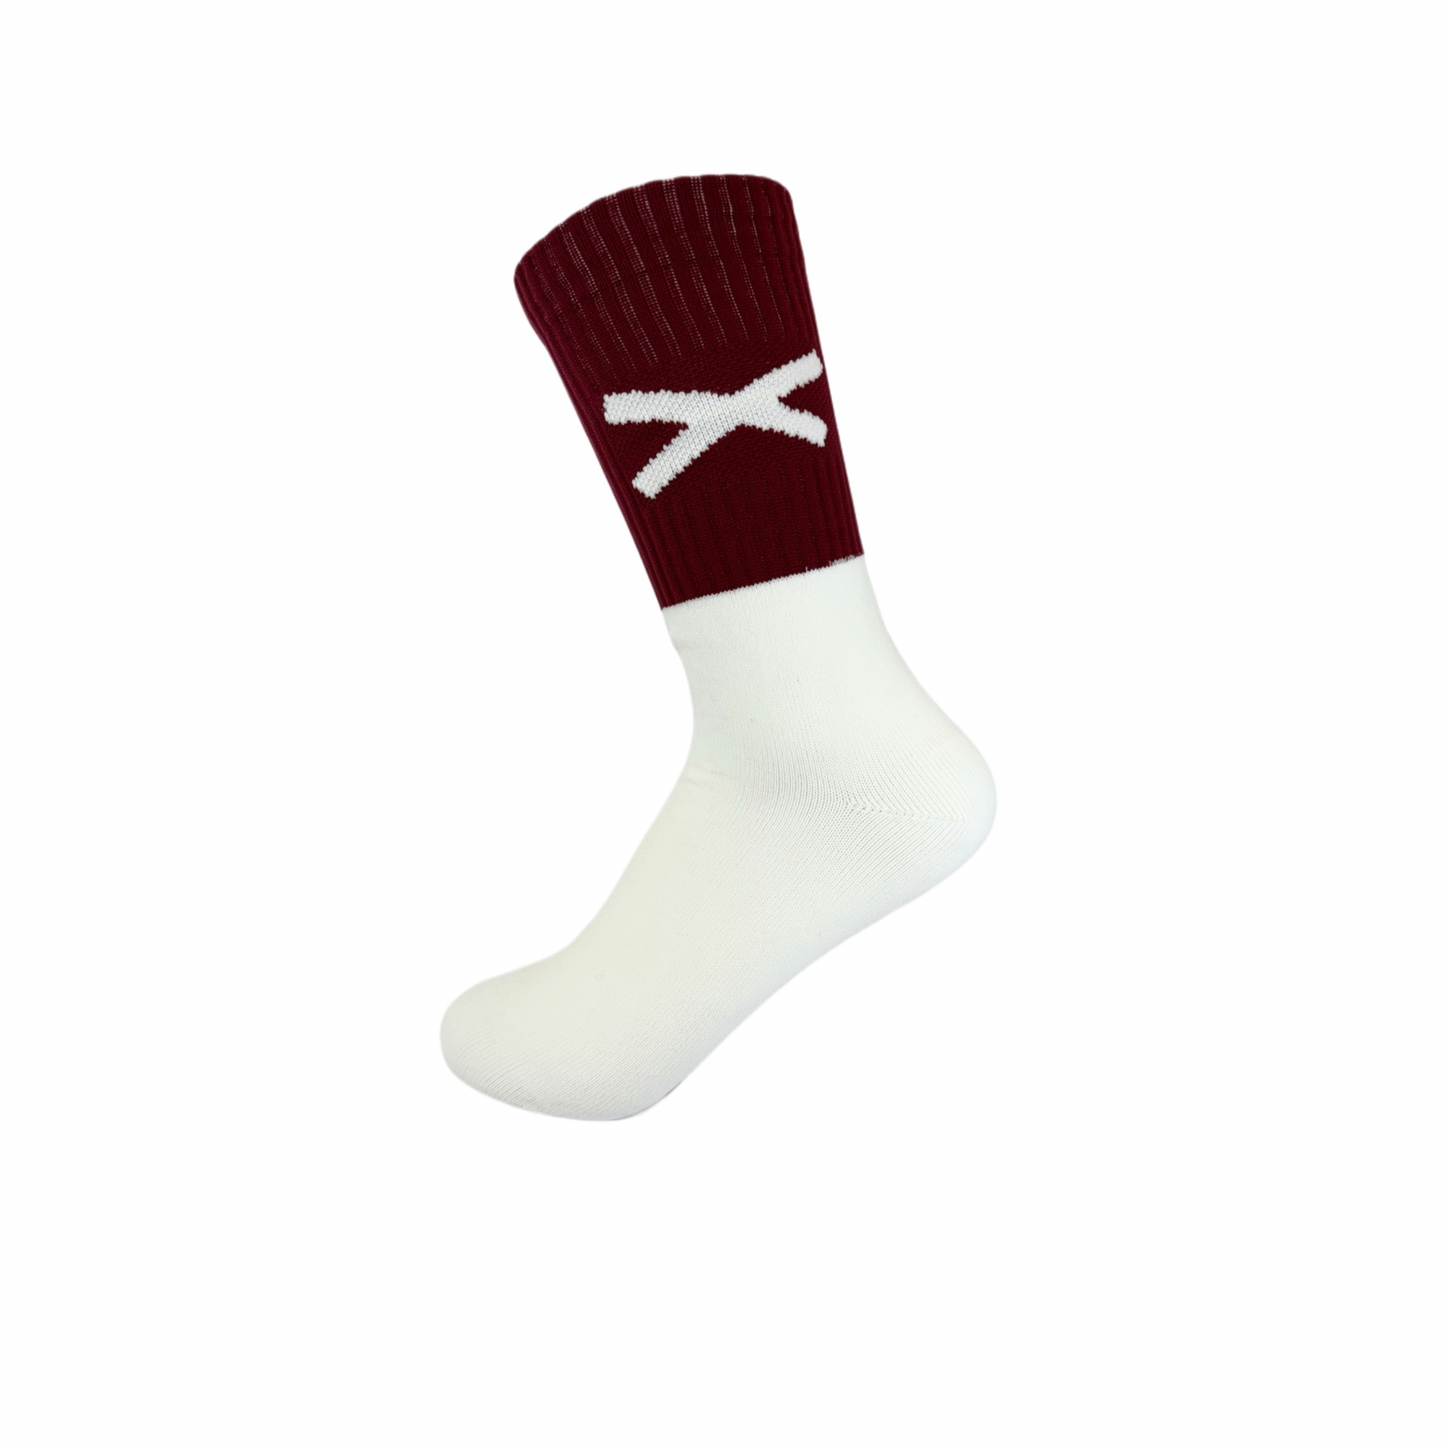 New and Improved X Gaelic Games sock (Maroon and White)